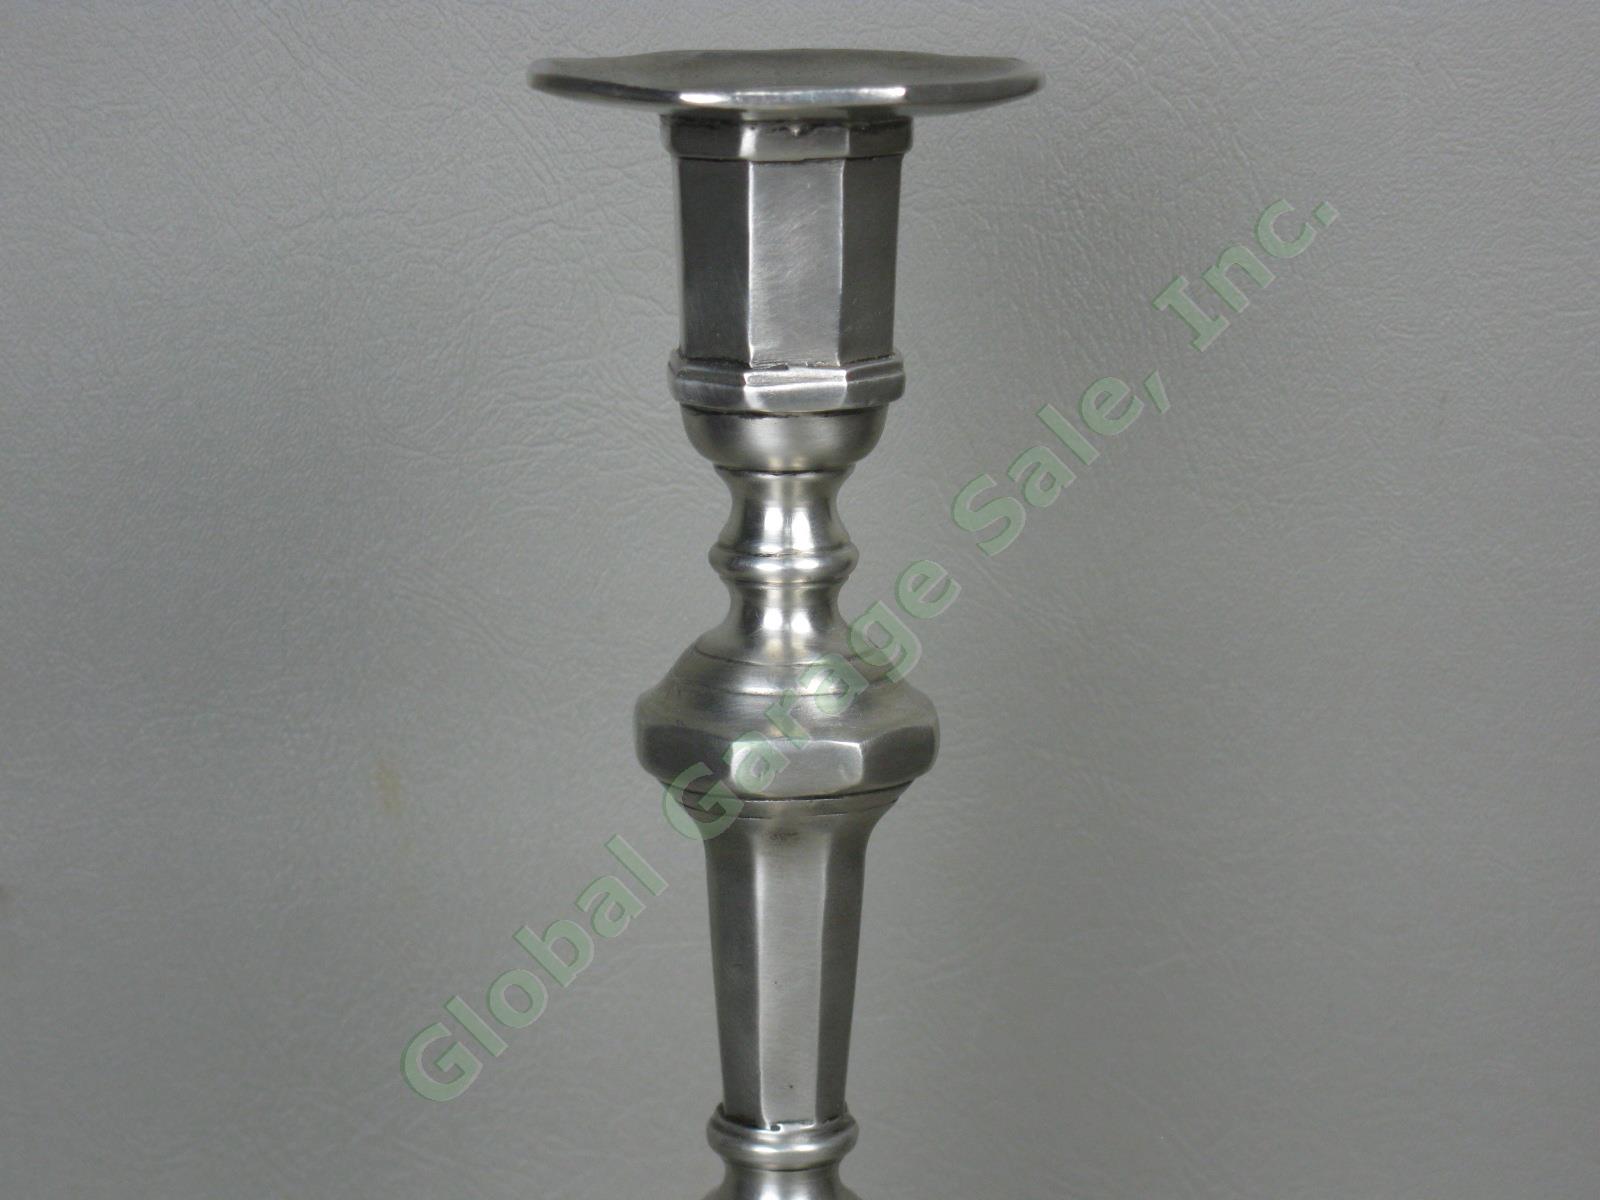 NEW Match Pewter Genoa Candlestick 9.75" Made In Italy $220 Retail No Reserve! 2